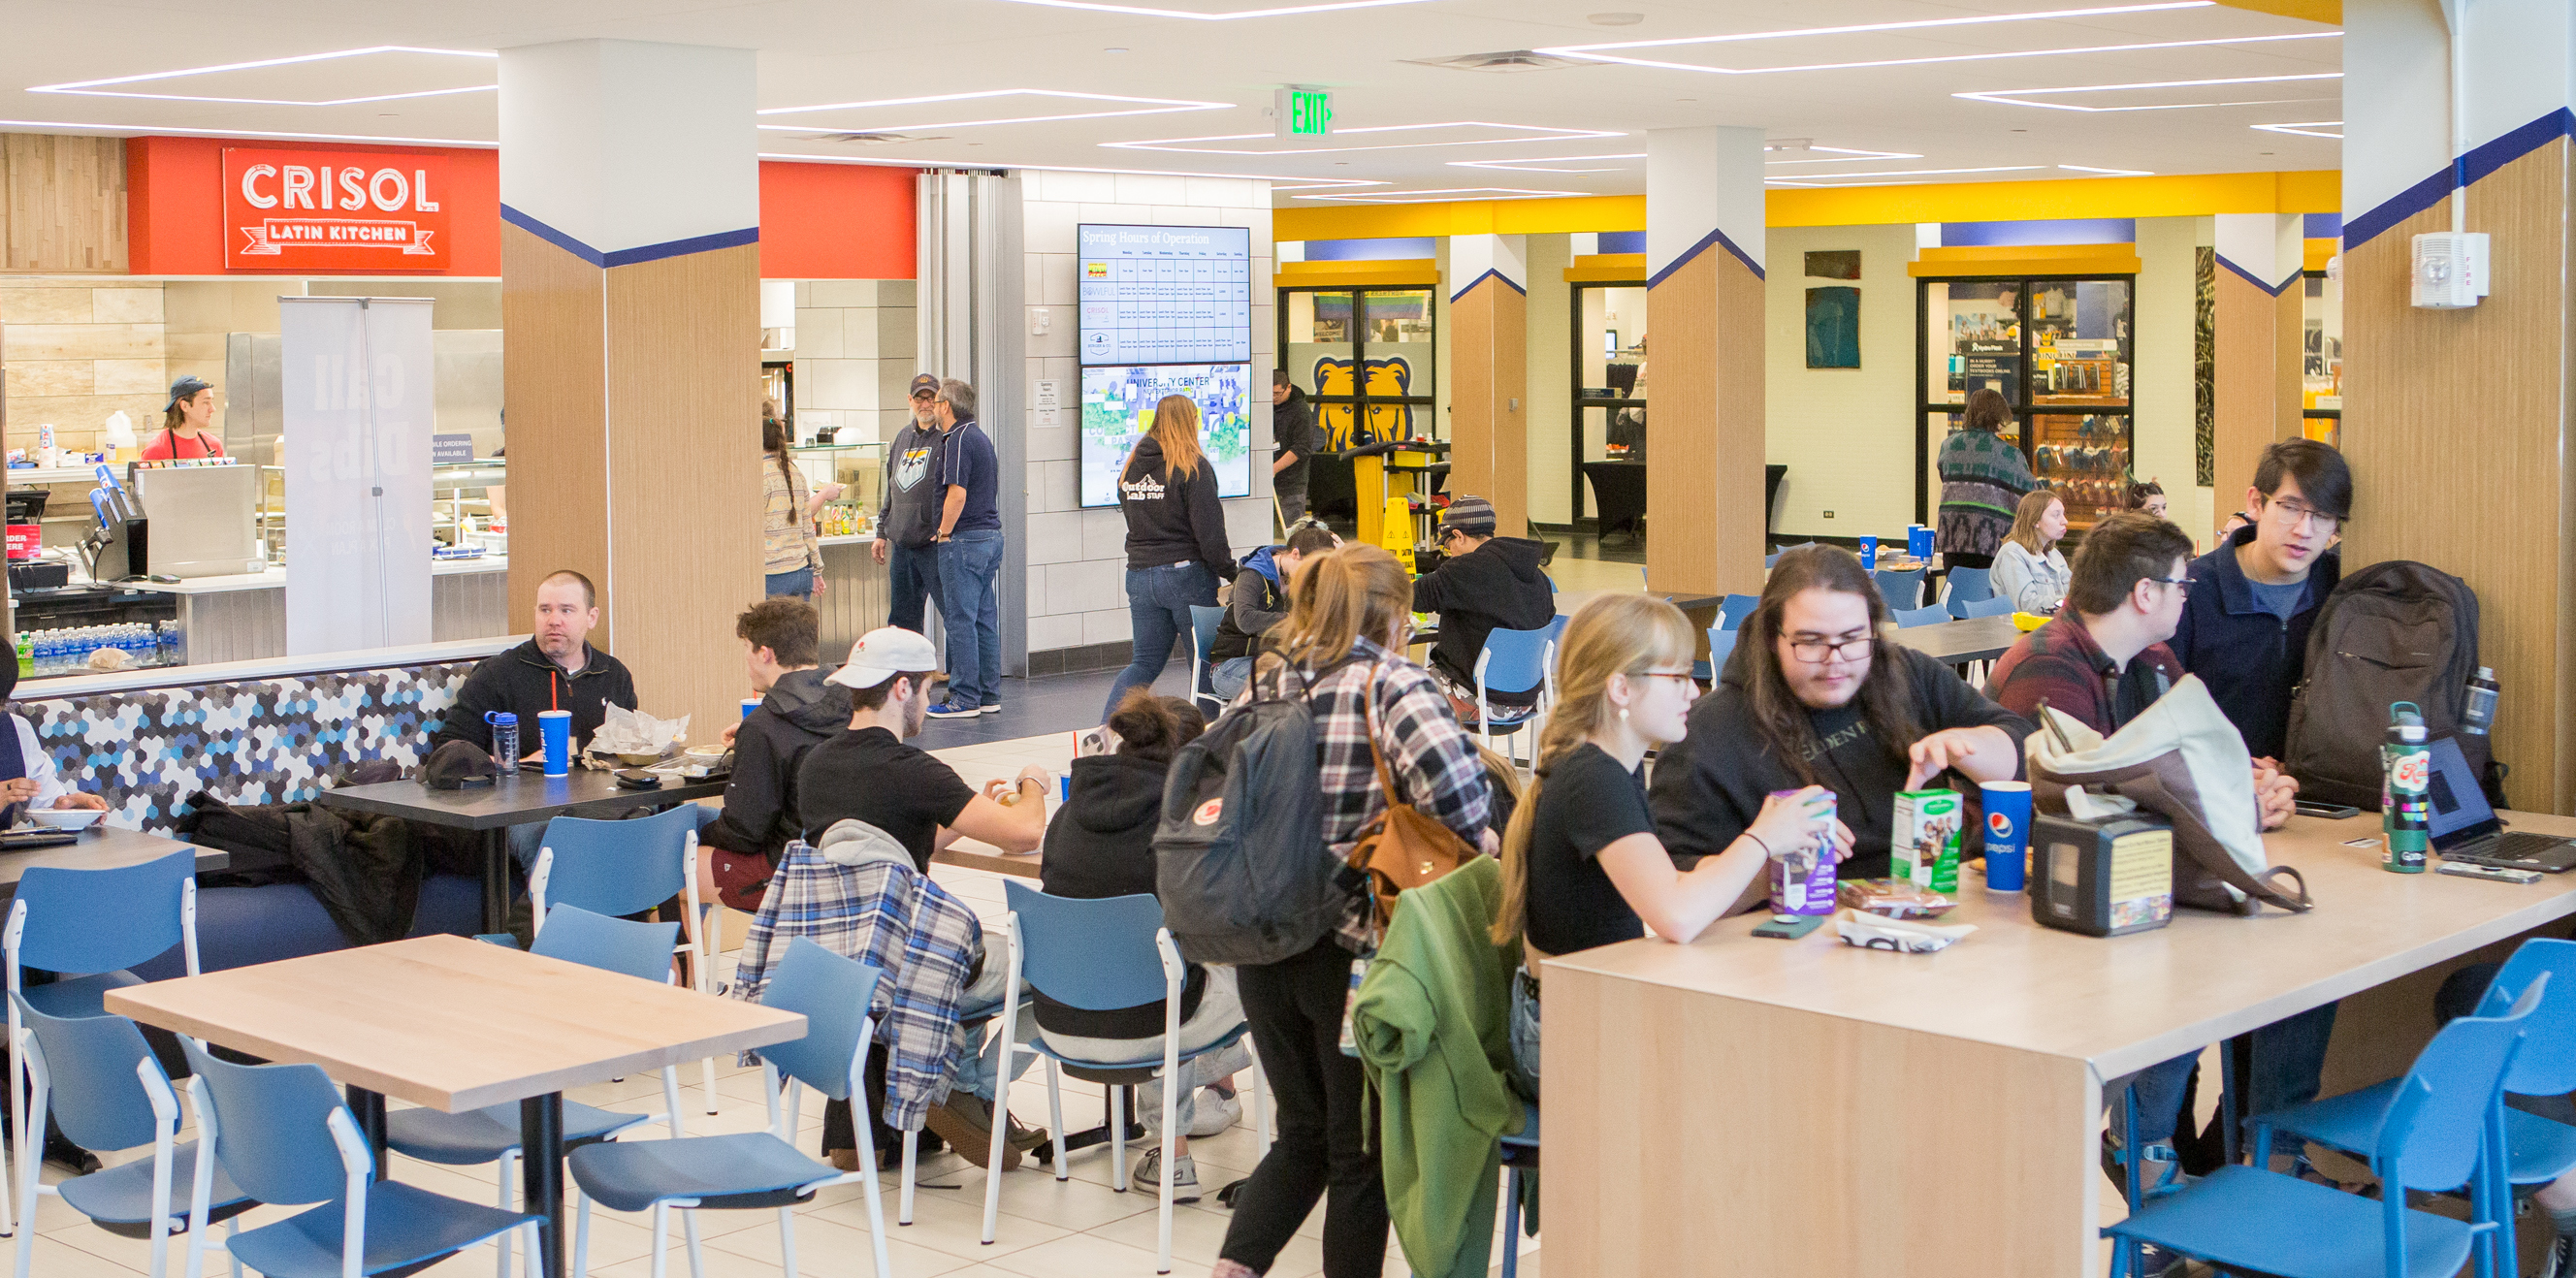 students sitting at tables eating together in new food court